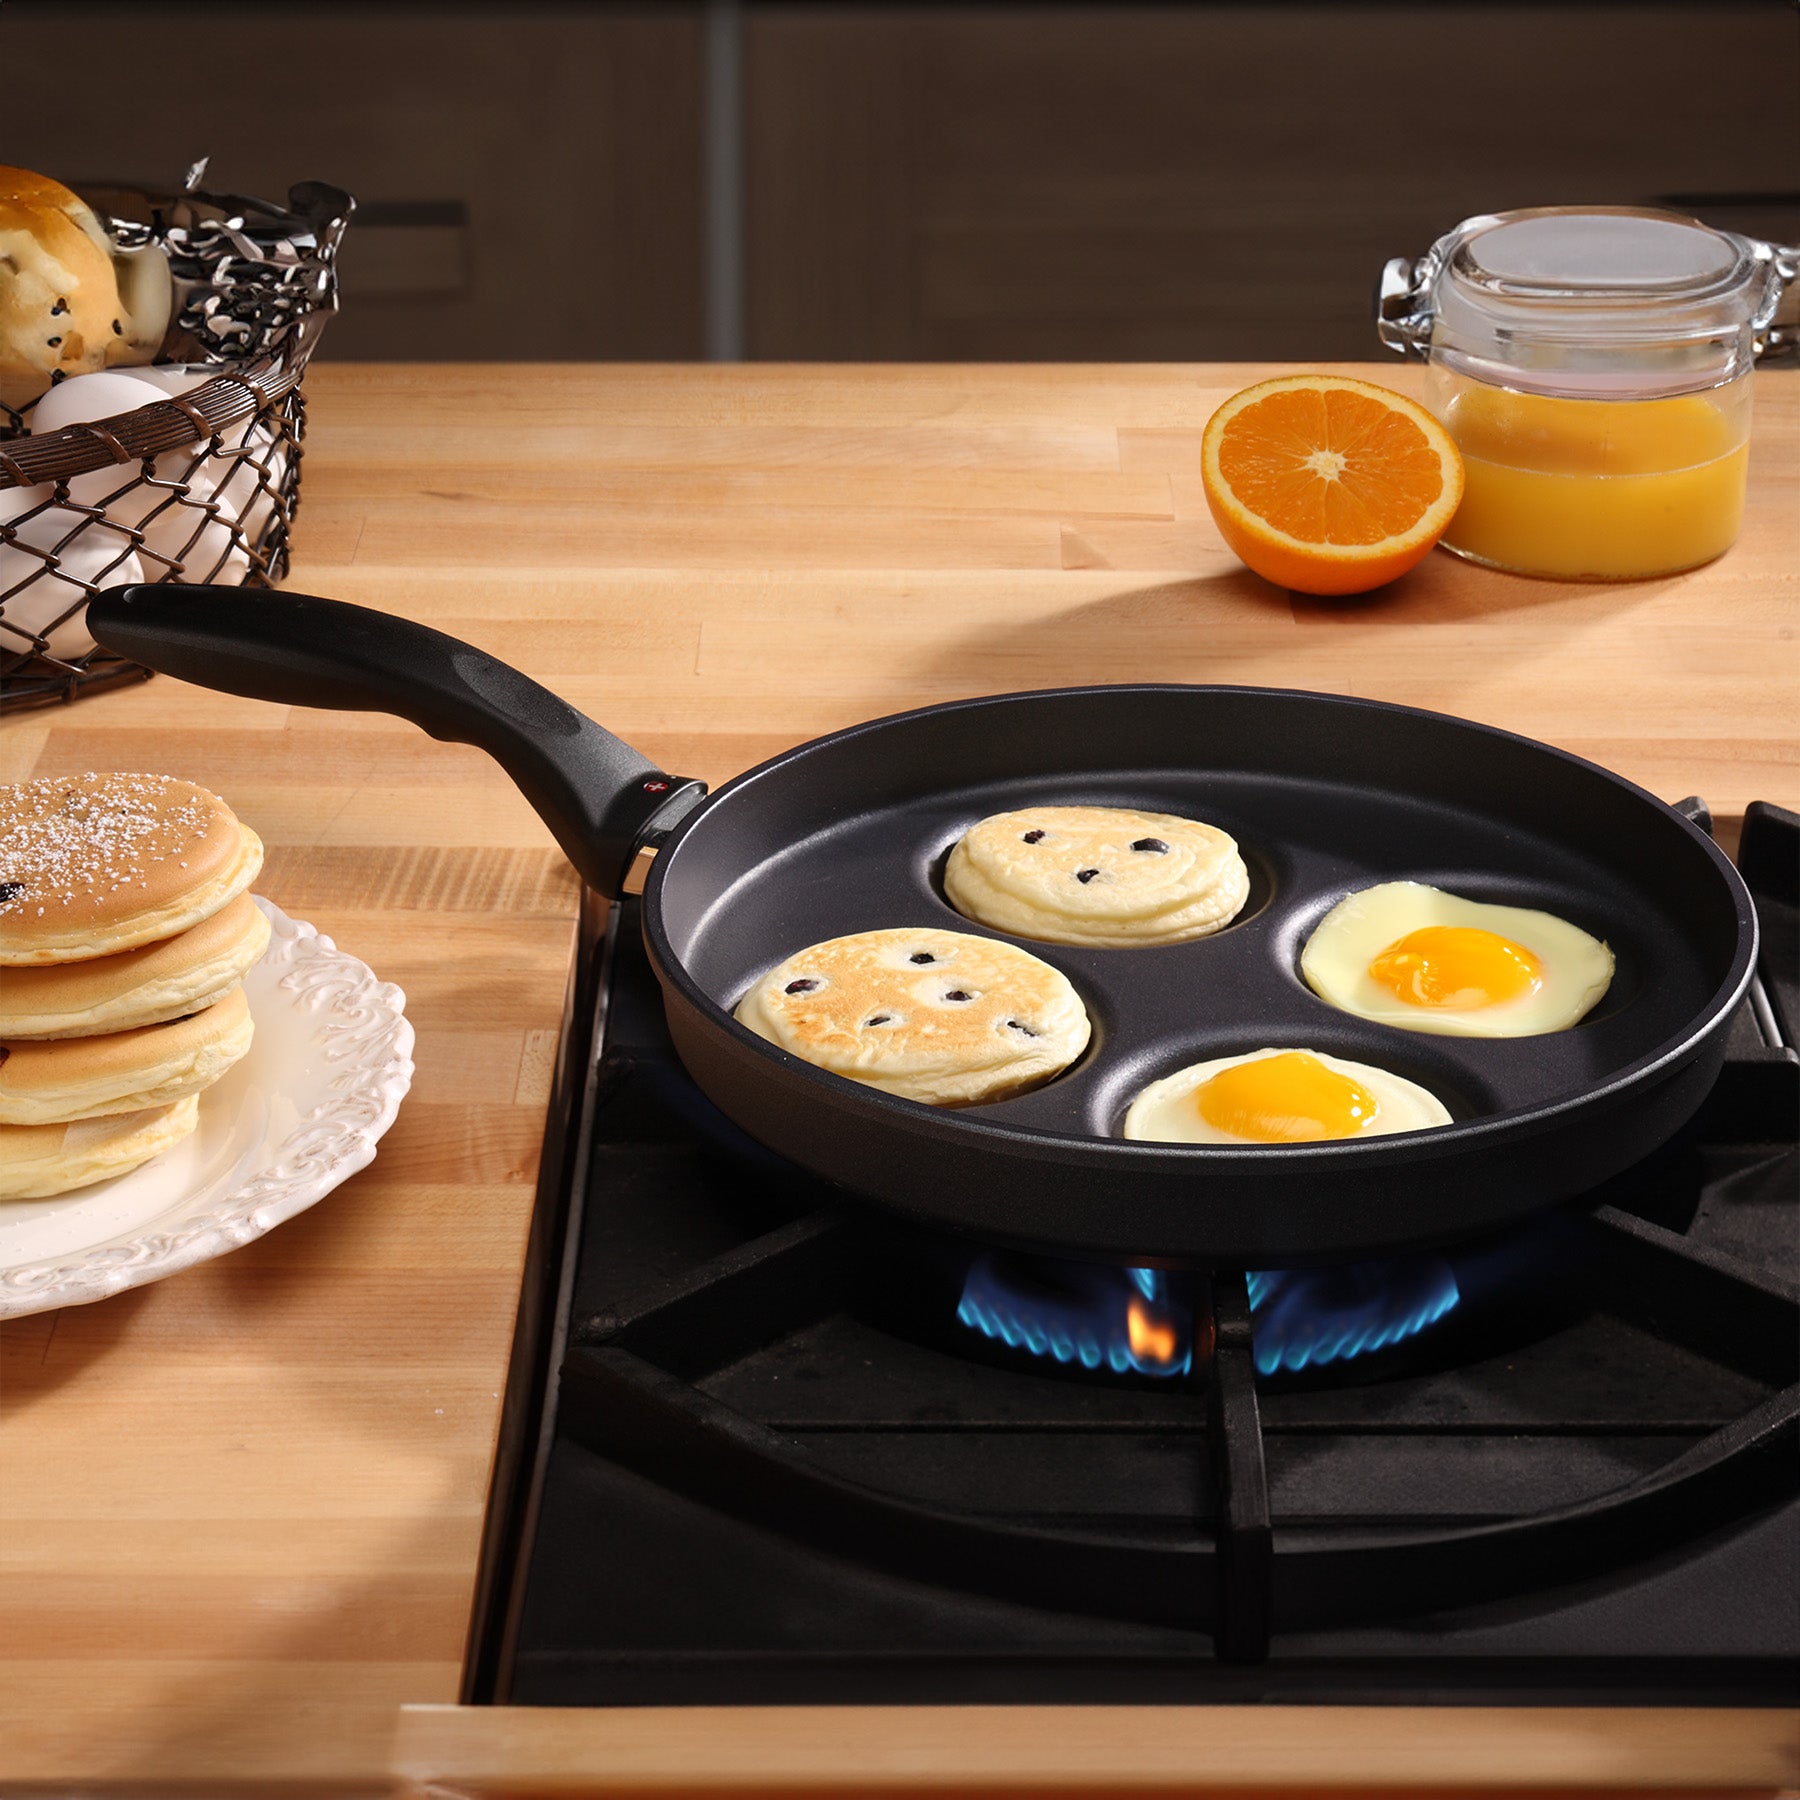 HD Nonstick 10.25" Plett Pan - Induction in use on kitchen gas stove top